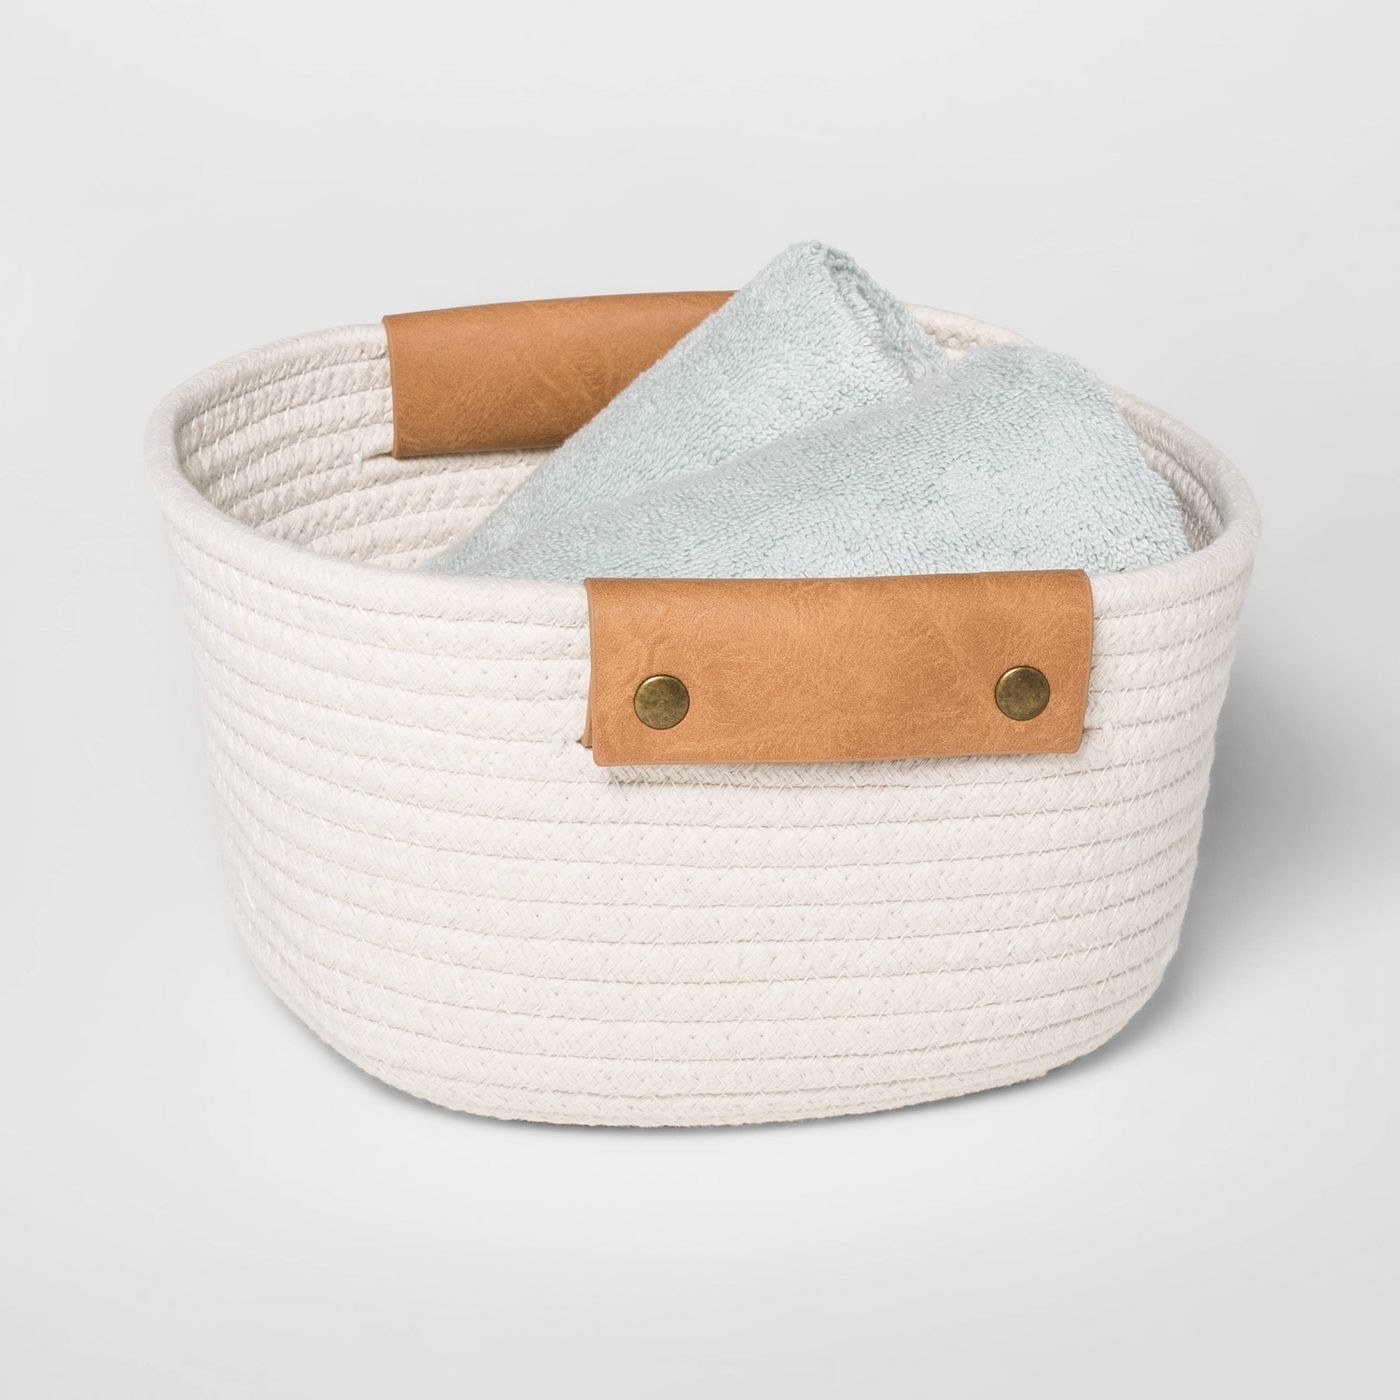 A white coiled rope storage basket with towels in it